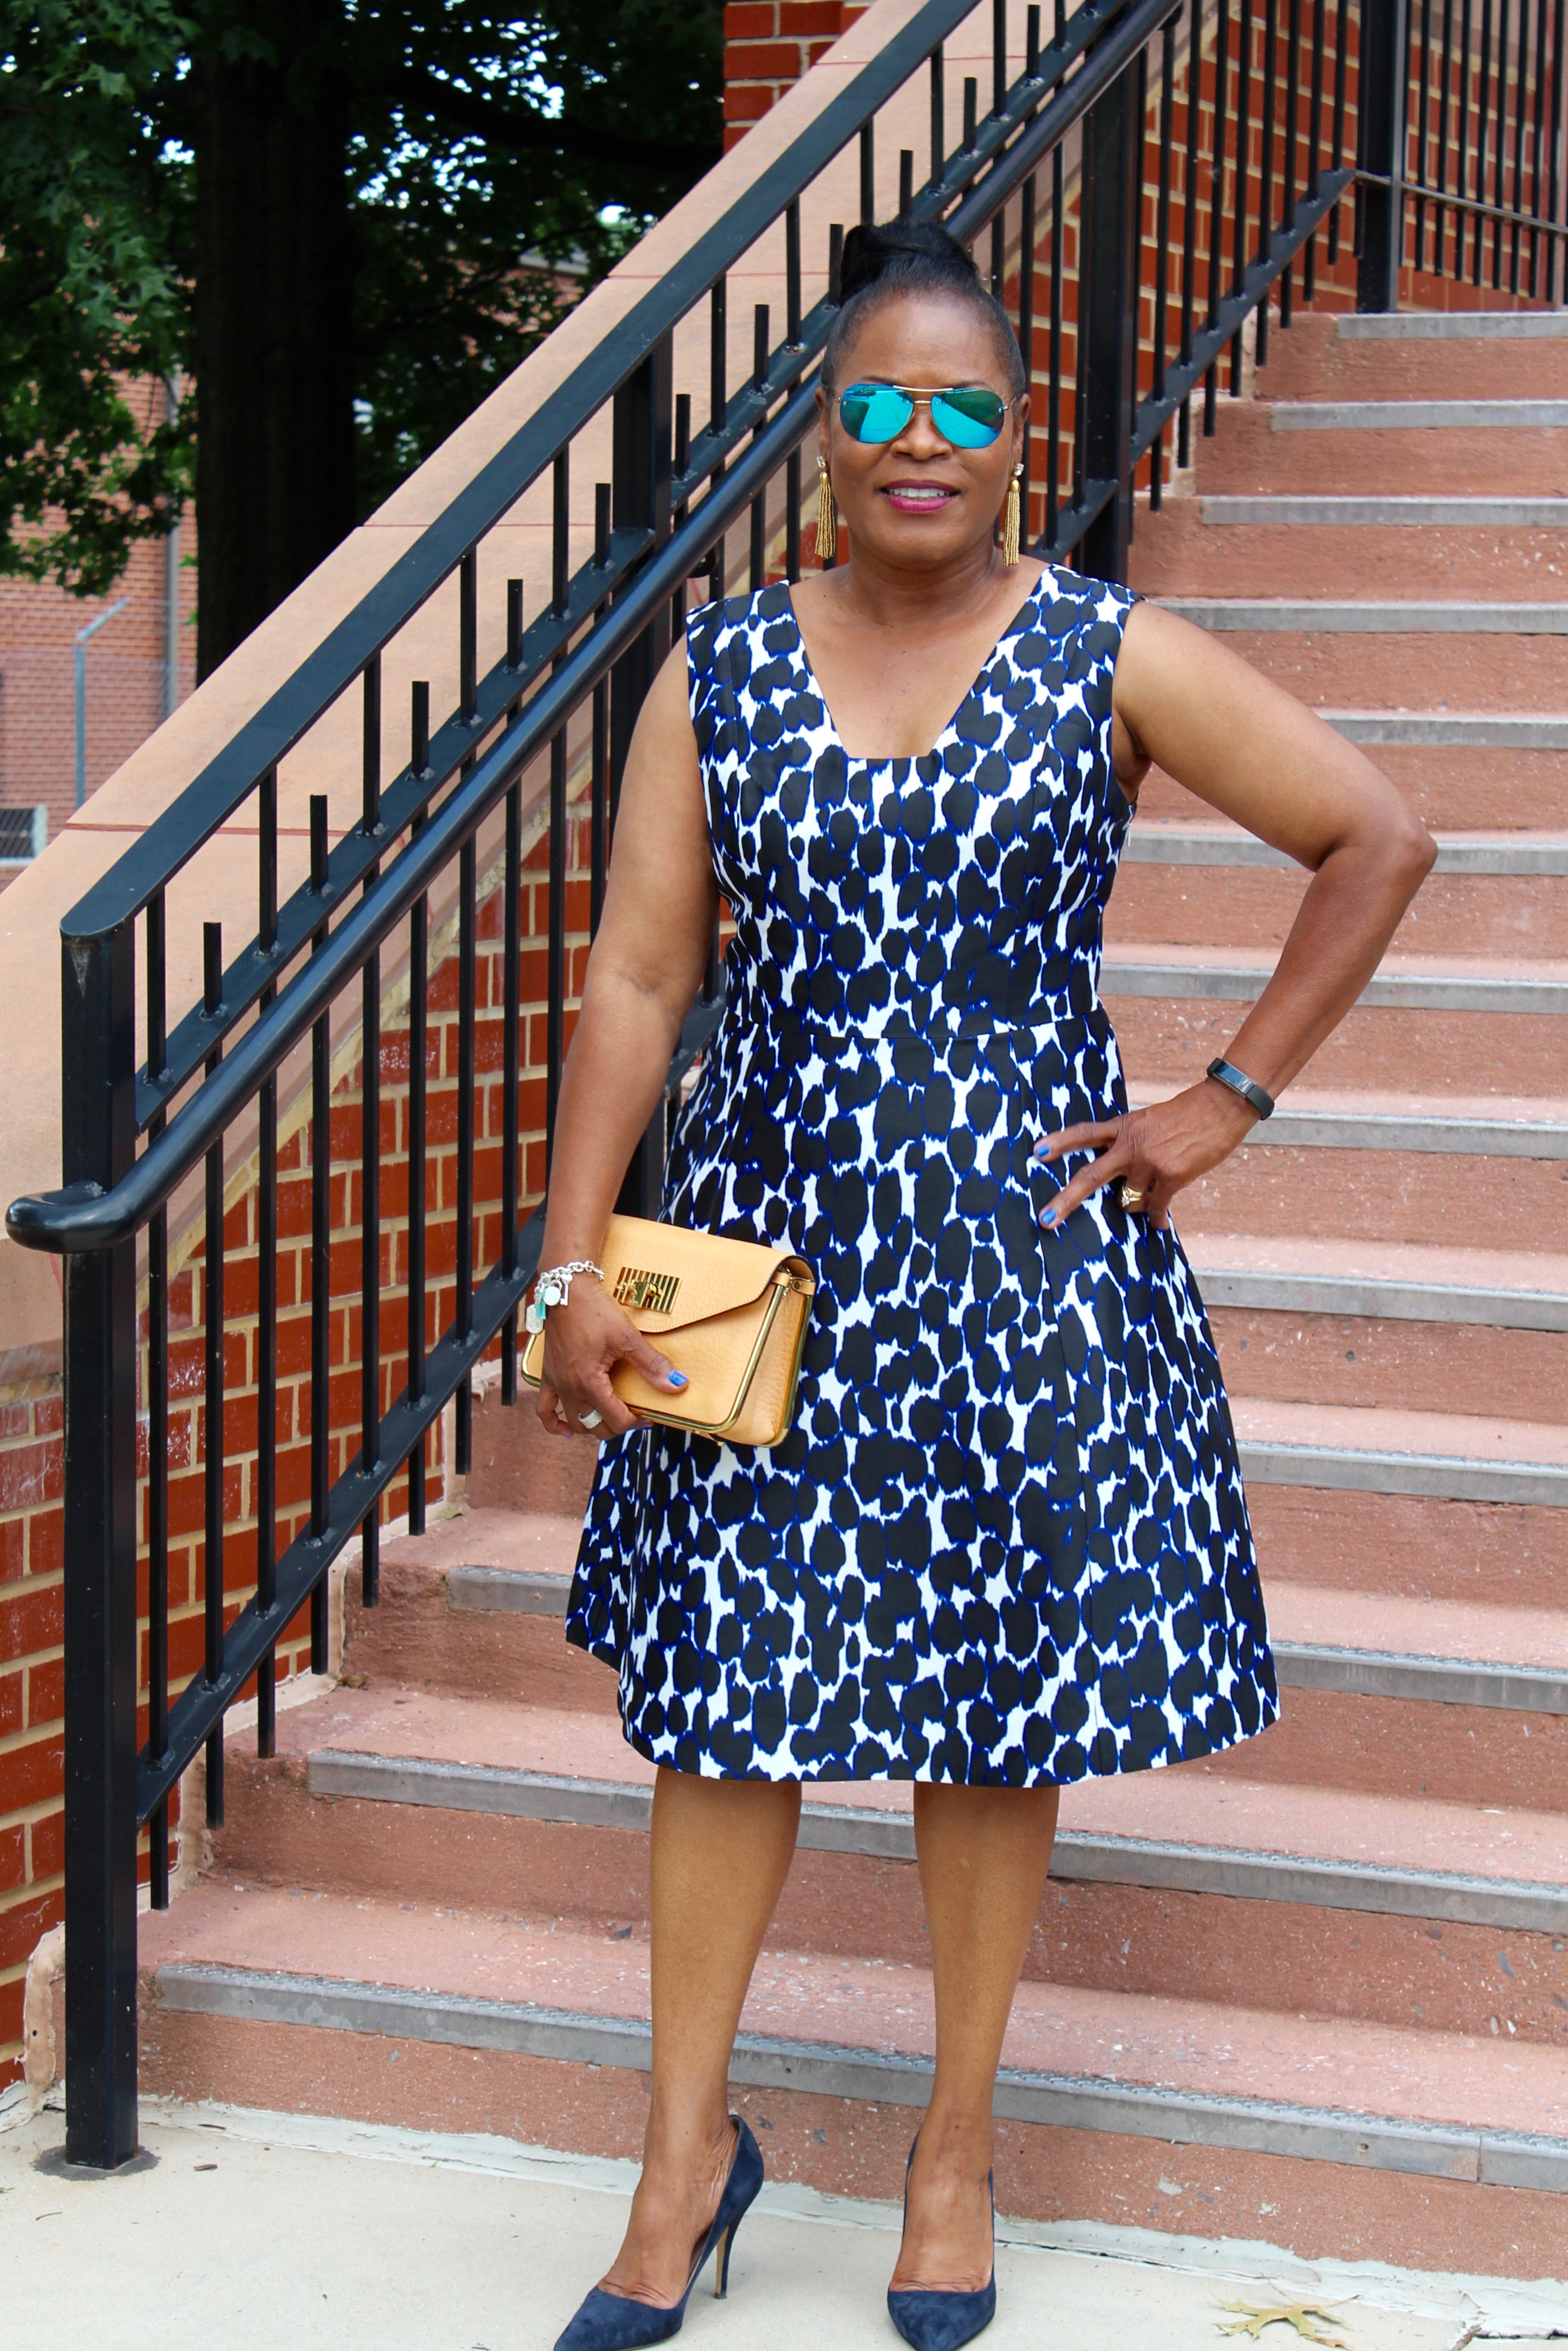 Wearing: Kate Spade Fit and Flare Navy Leopard-print Dress, Vintage Chloé Grained Sally Flap Calfskin Peach Clutch with Gold Chain, Kate Spade "Licorice" Navy Suede Heels , Ray-Ban Mirrored Aviators with J. Crew Gold Bead Tassel Earrings. 